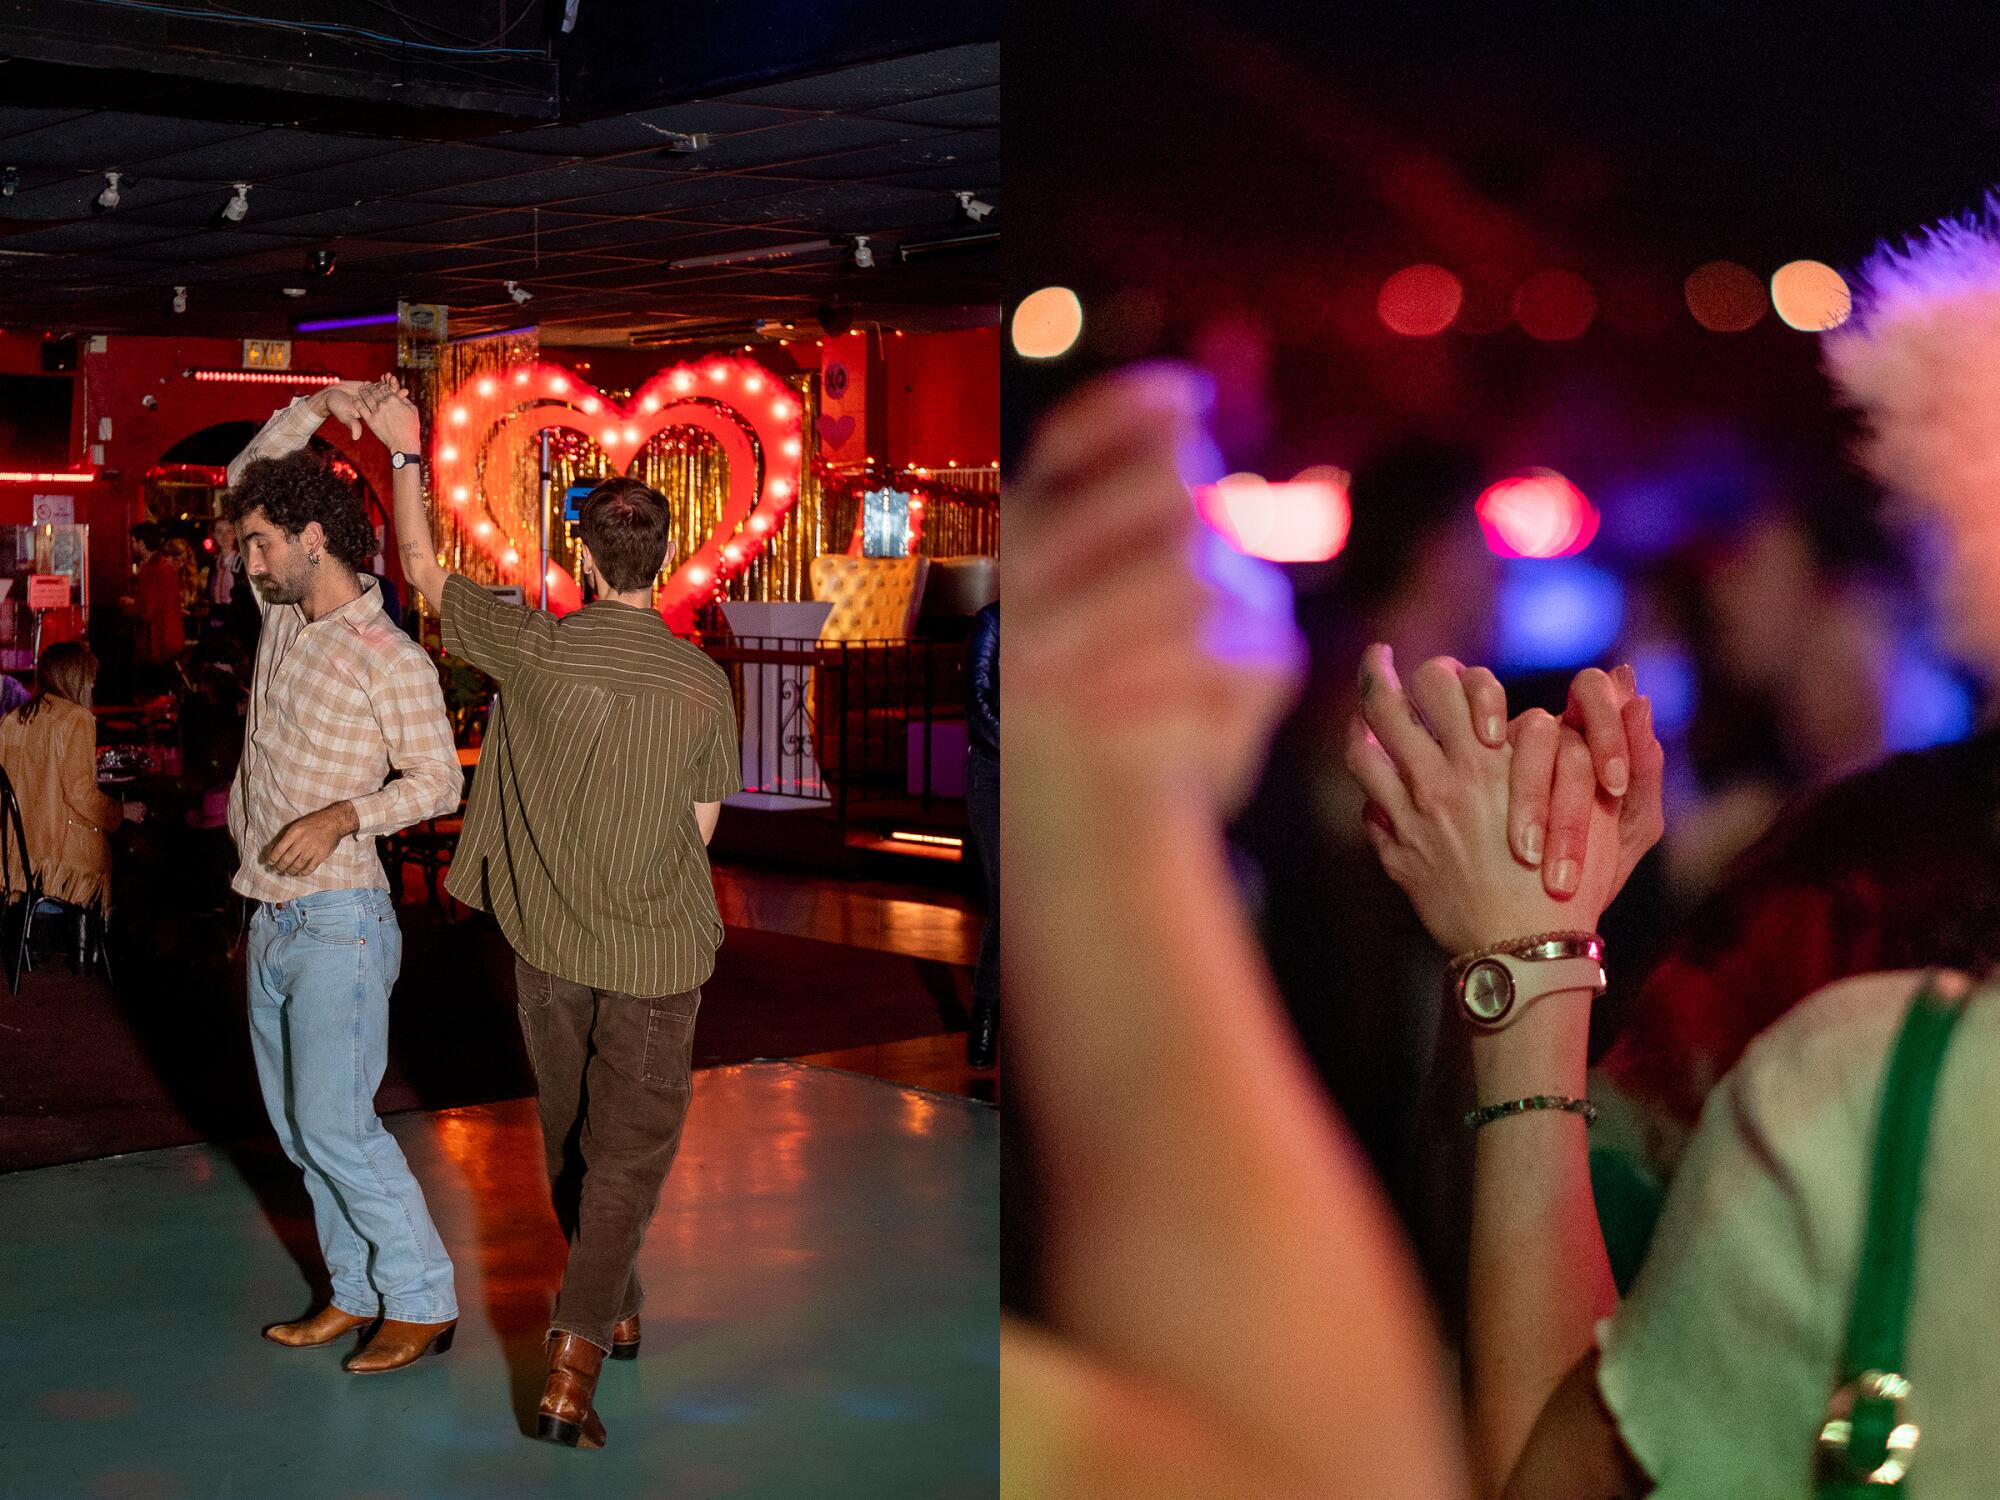 Two photos side by side, one showing two people dancing and the other a close up of two people holding hands.